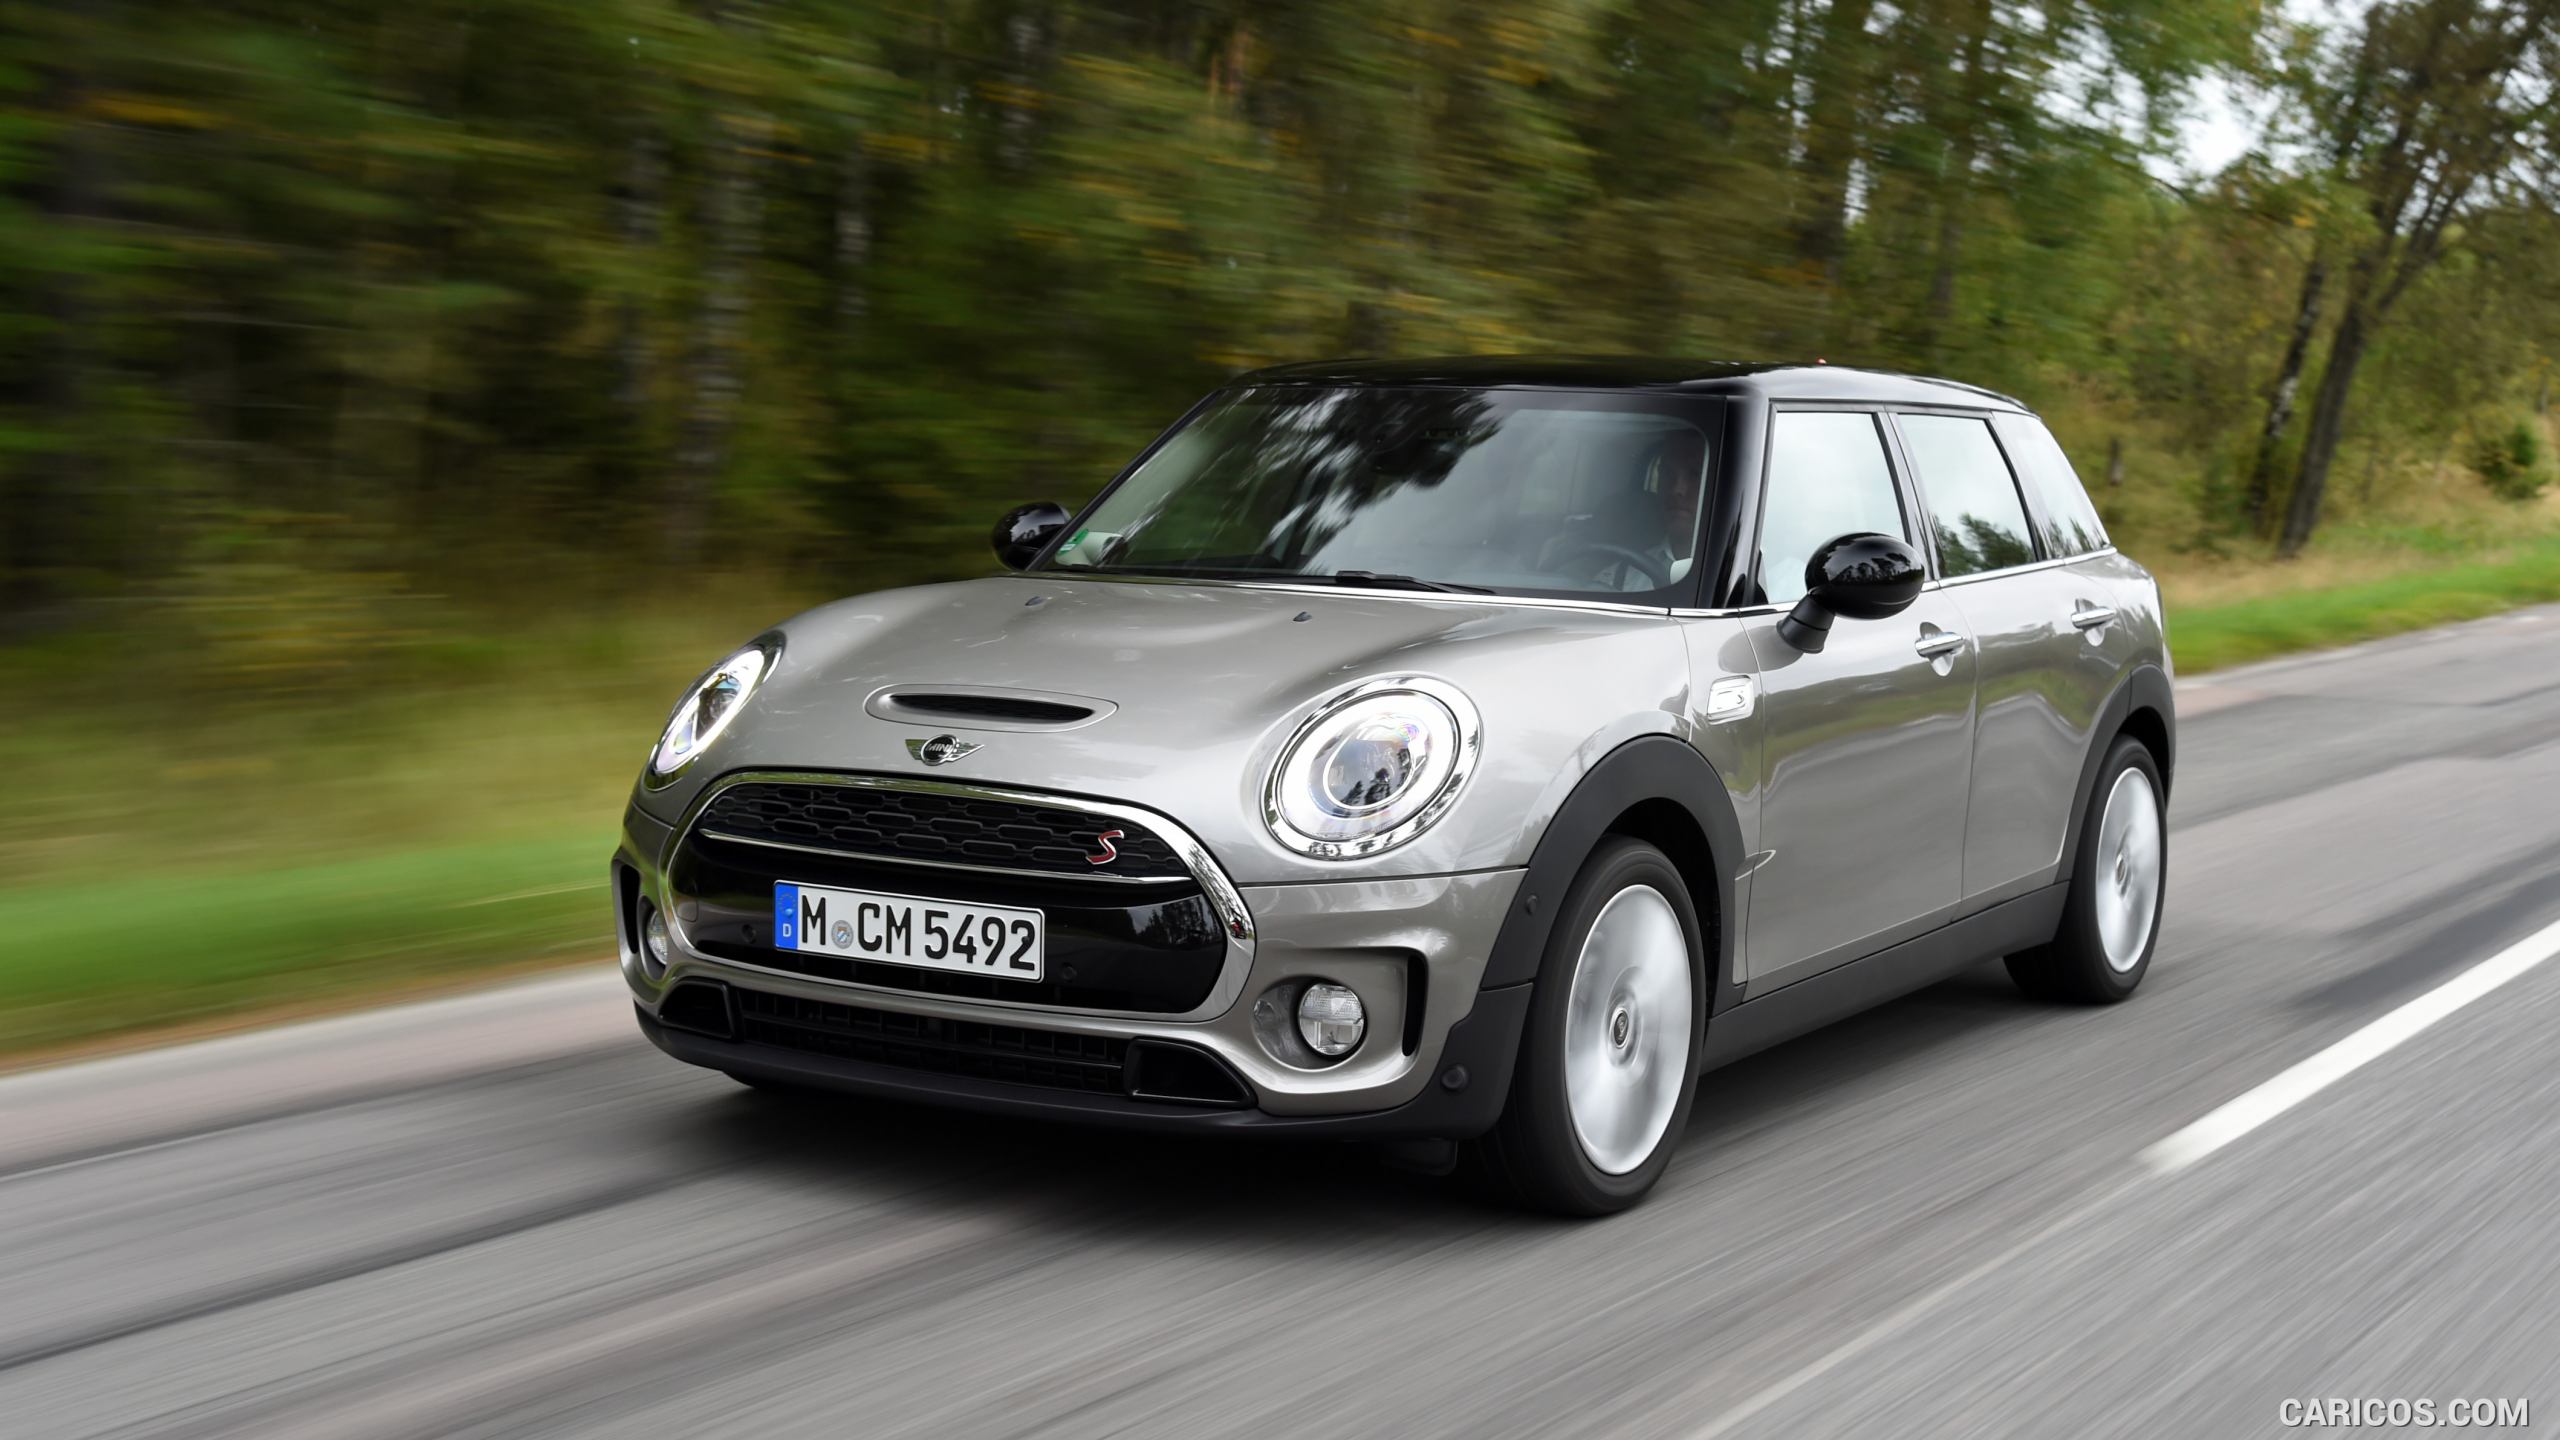 2016 MINI Cooper S Clubman in Metallic Melting Silver - Front, #113 of 380